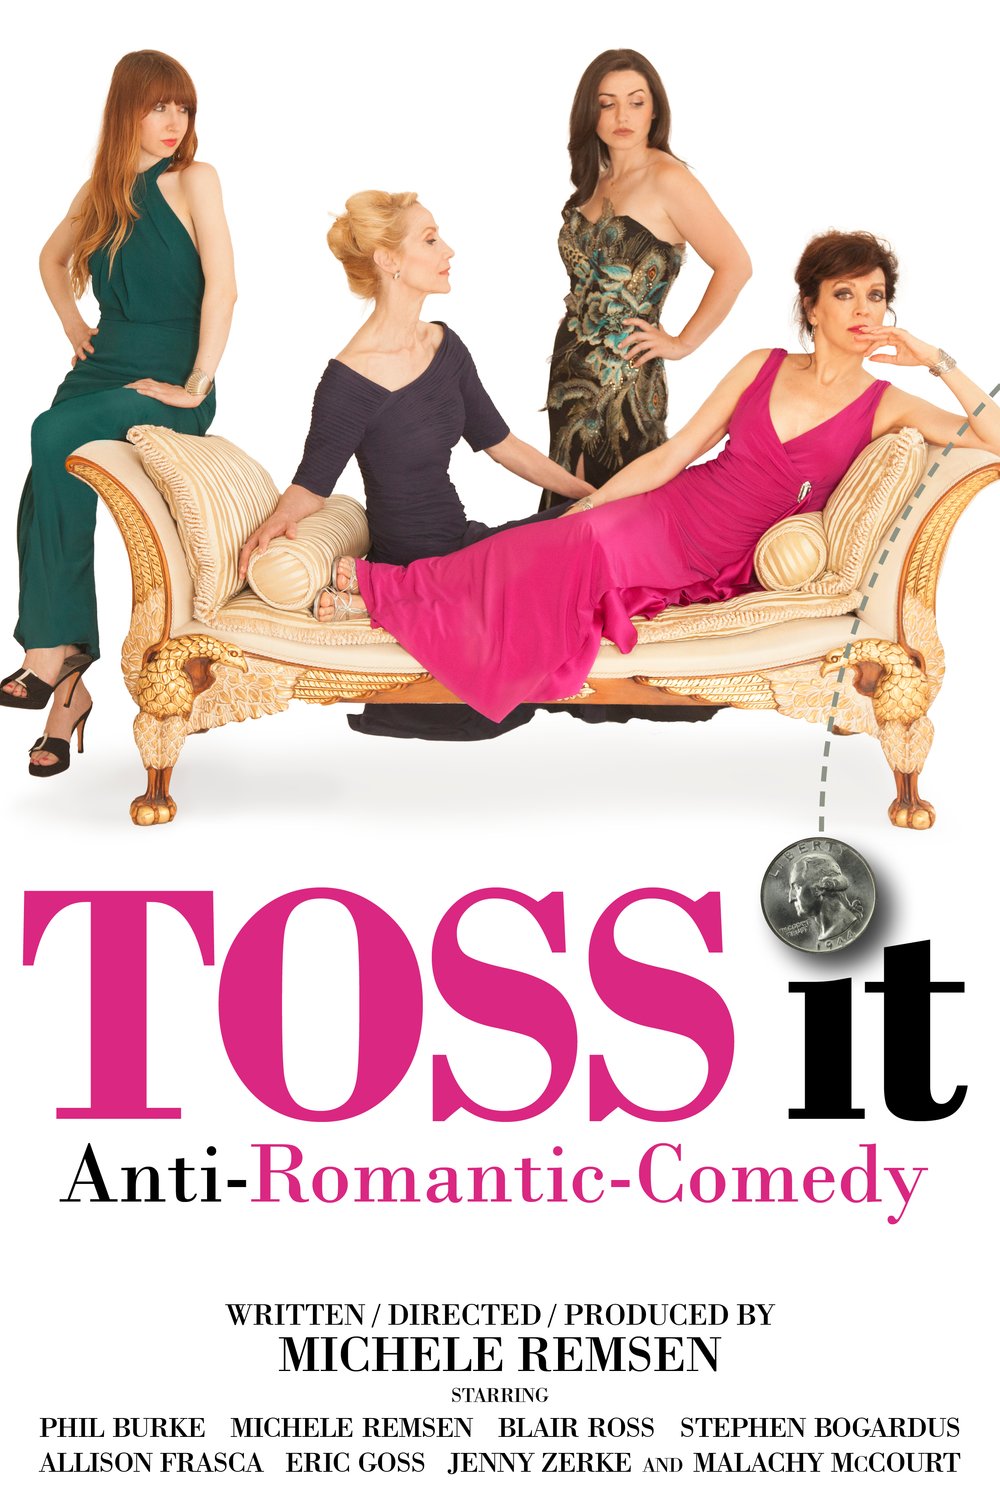 Poster of the movie Toss It